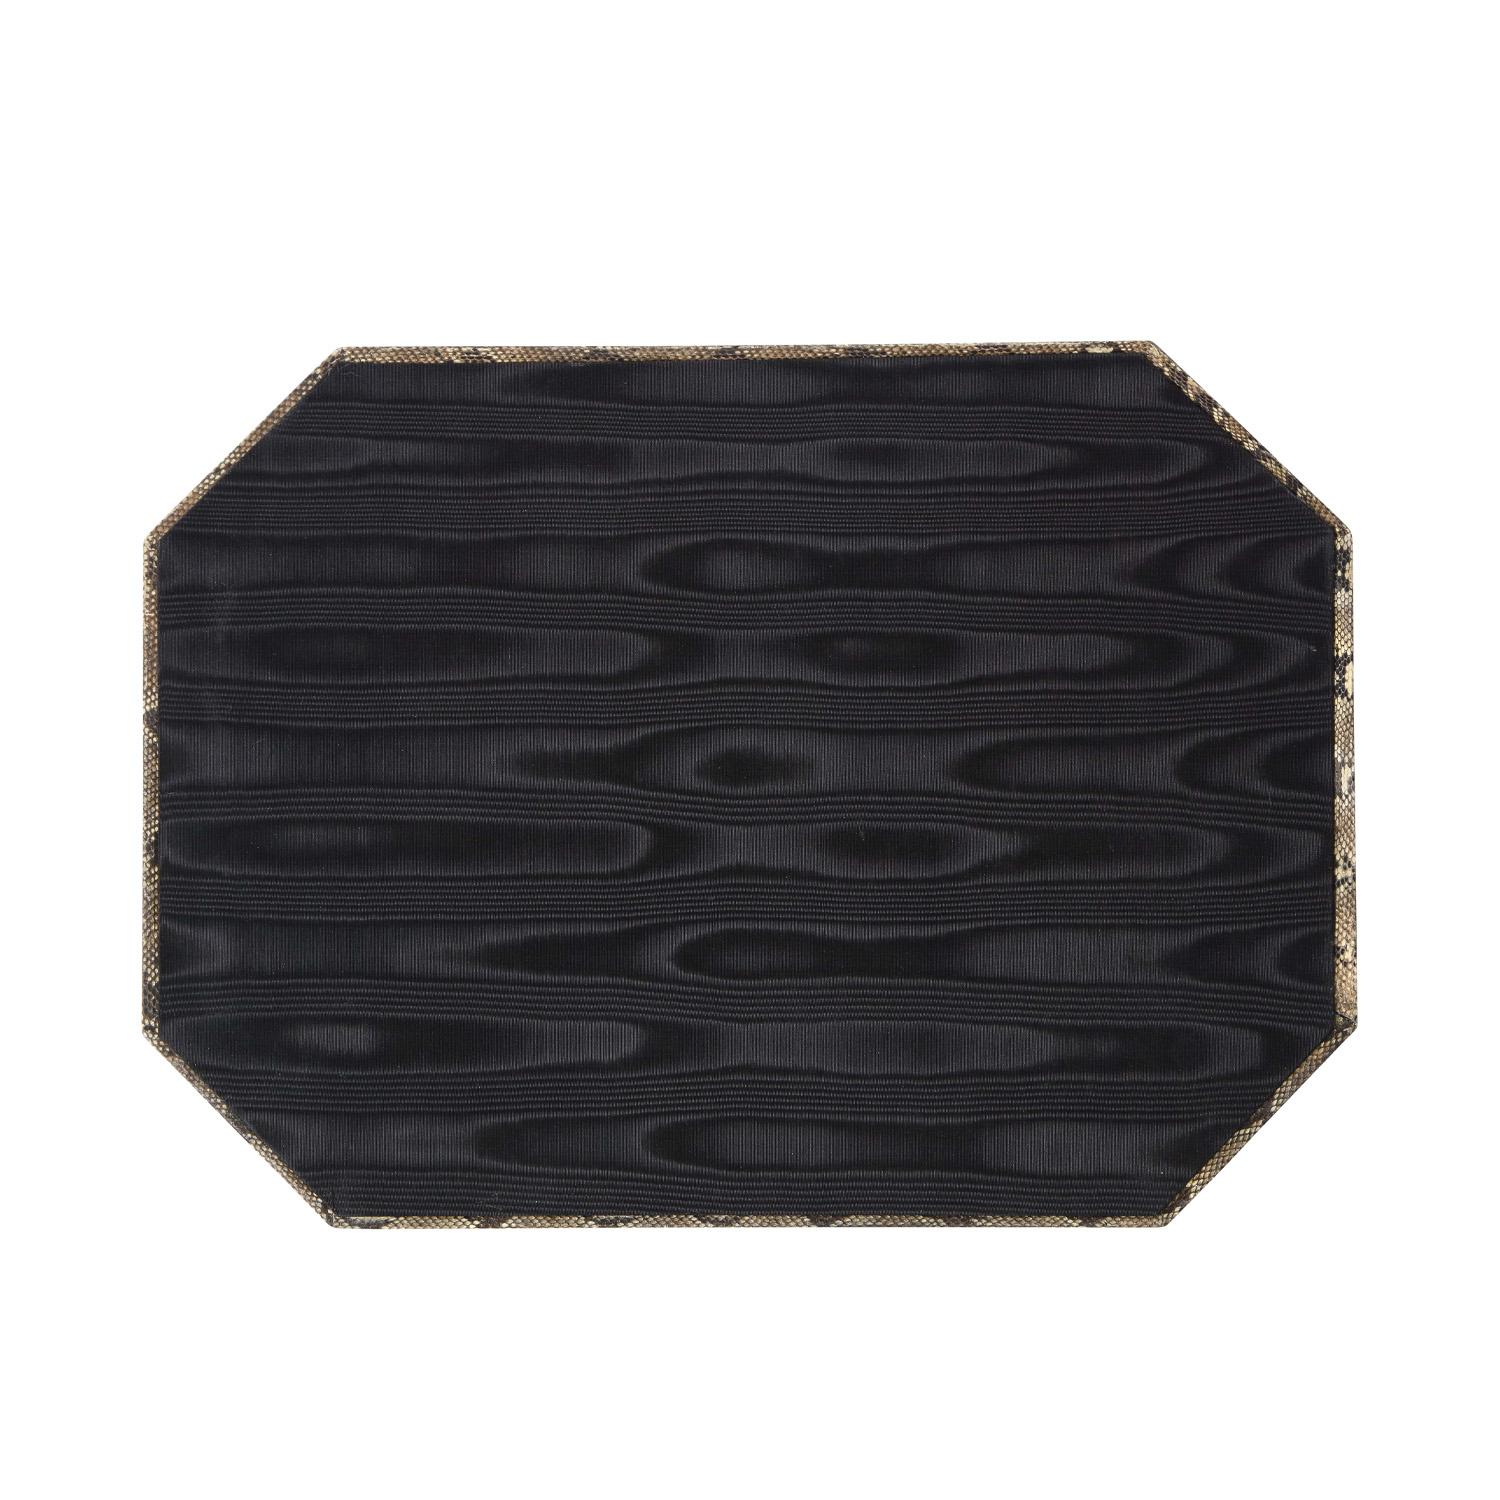 Lobel Originals Octagonal Tray in Natural Python, New In New Condition For Sale In New York, NY